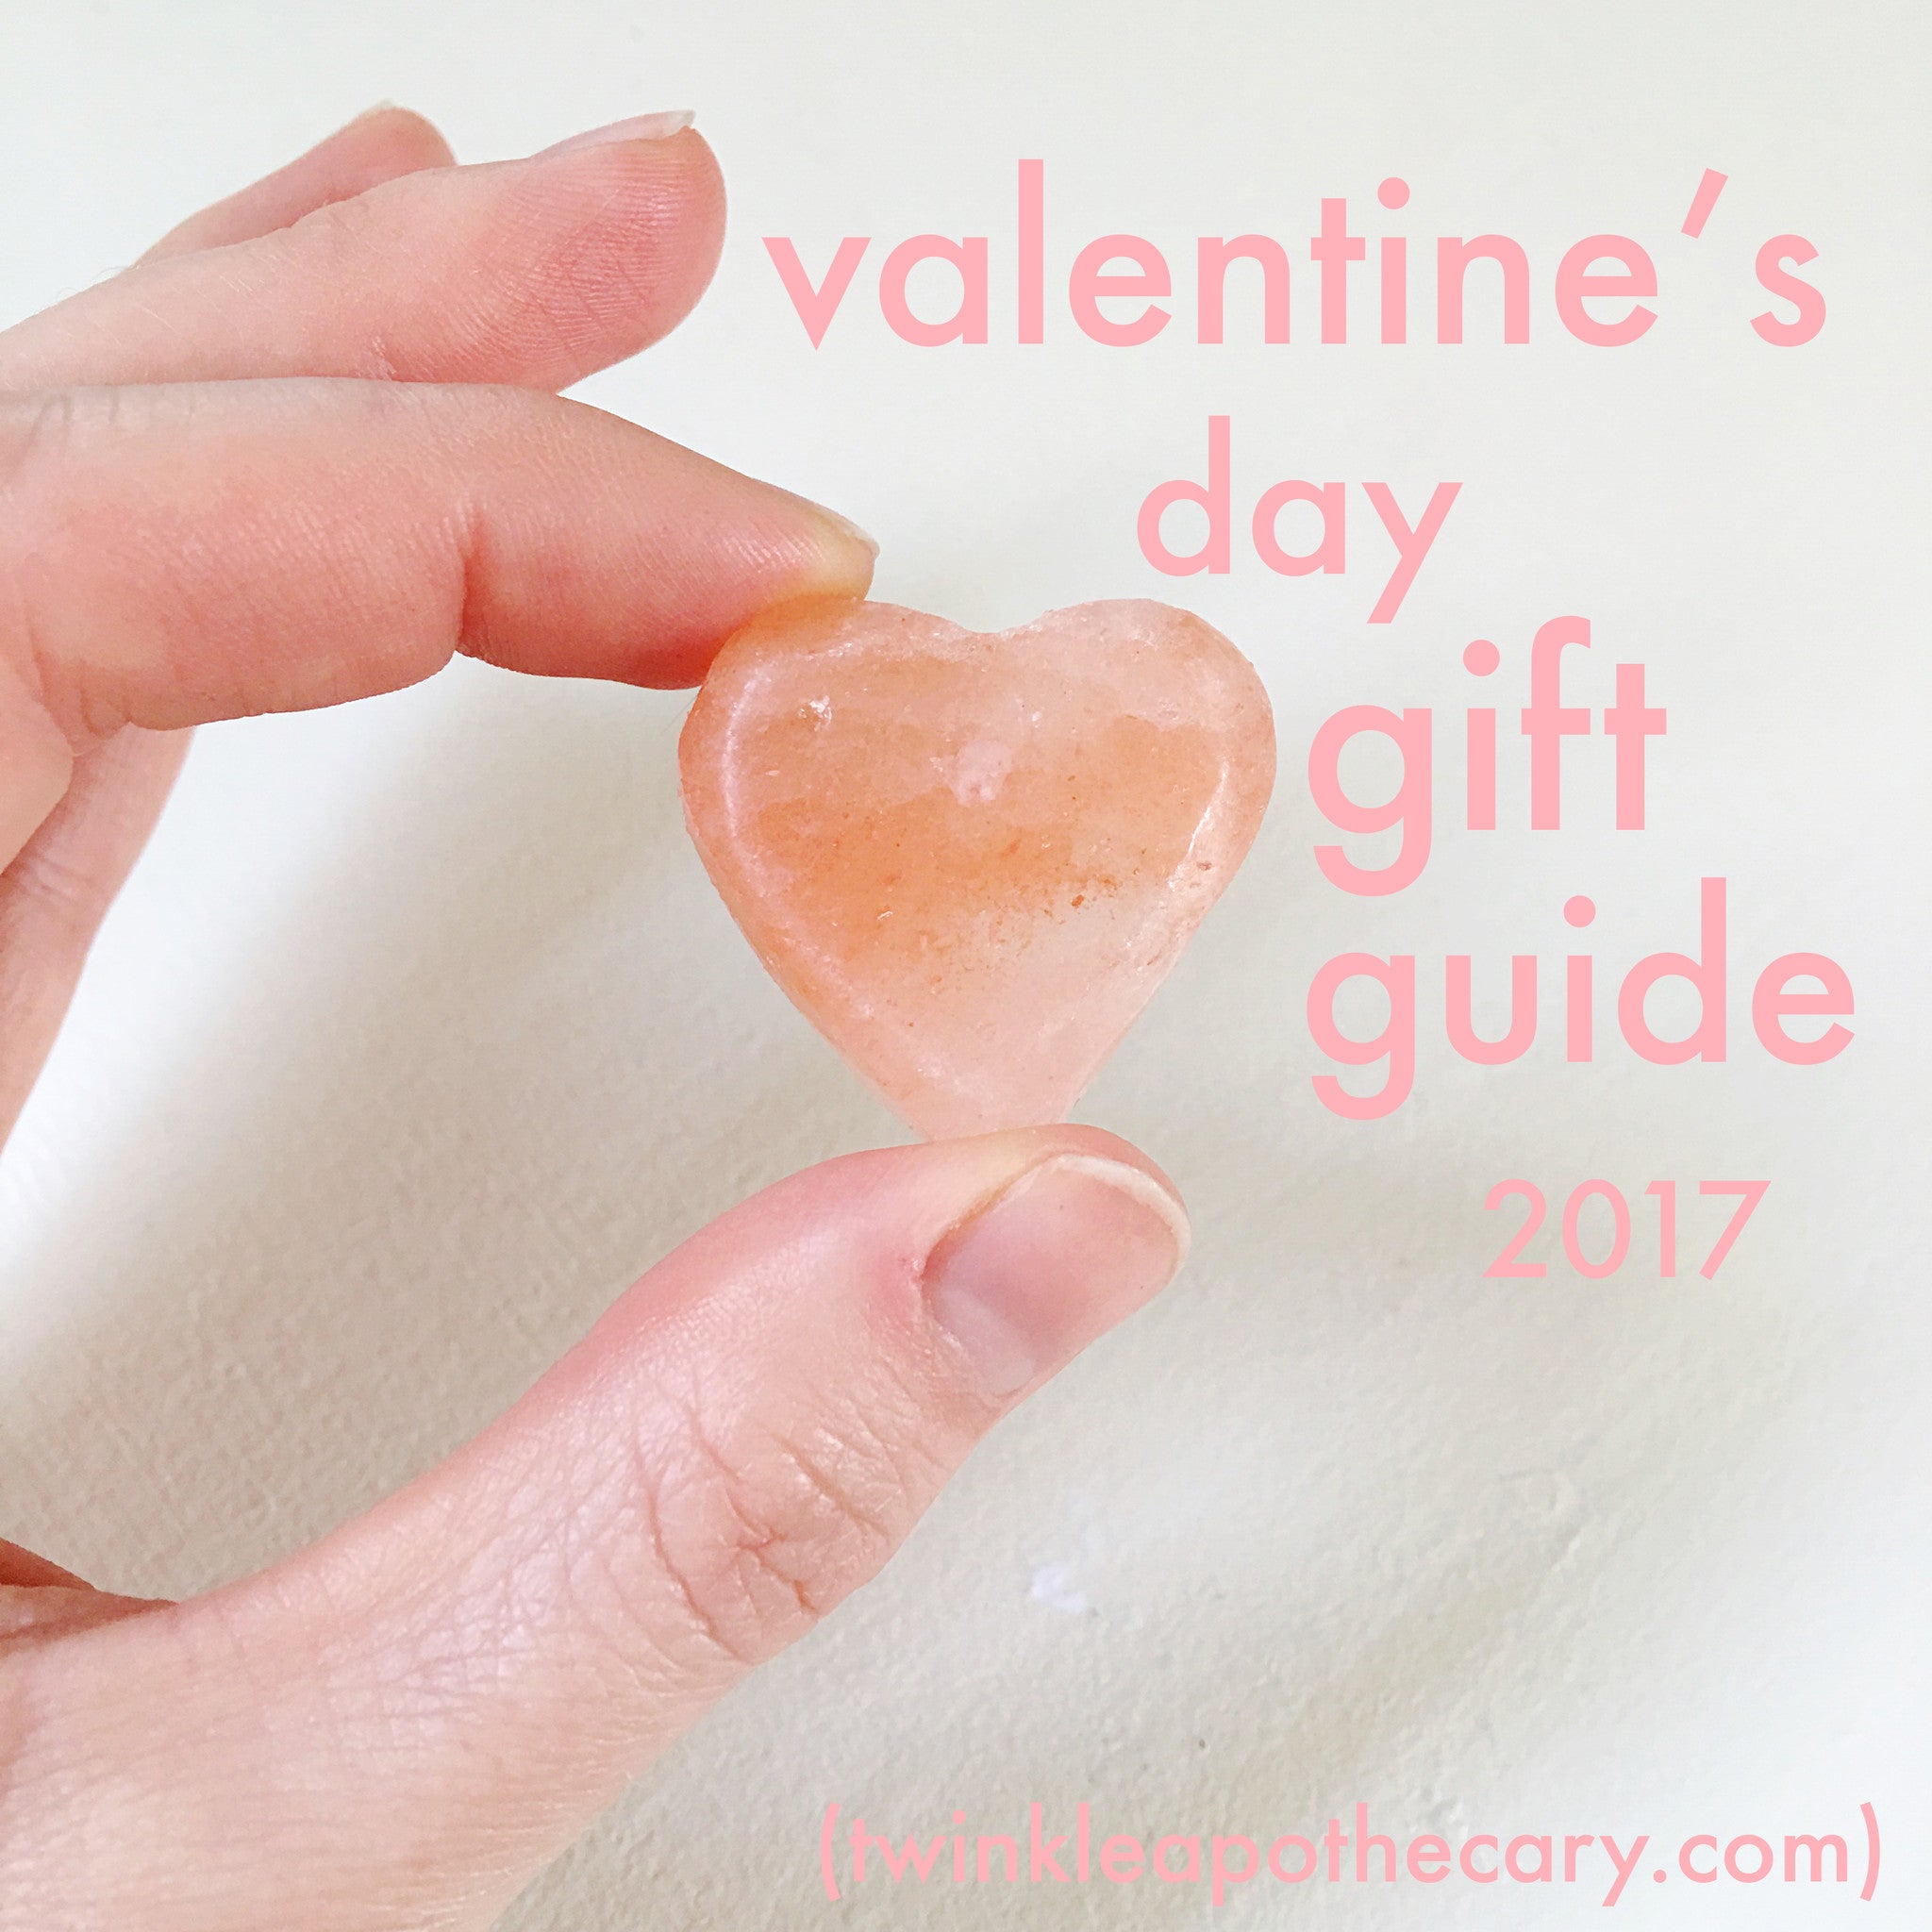 twinkle apothecary valentine's day gift guide 2017